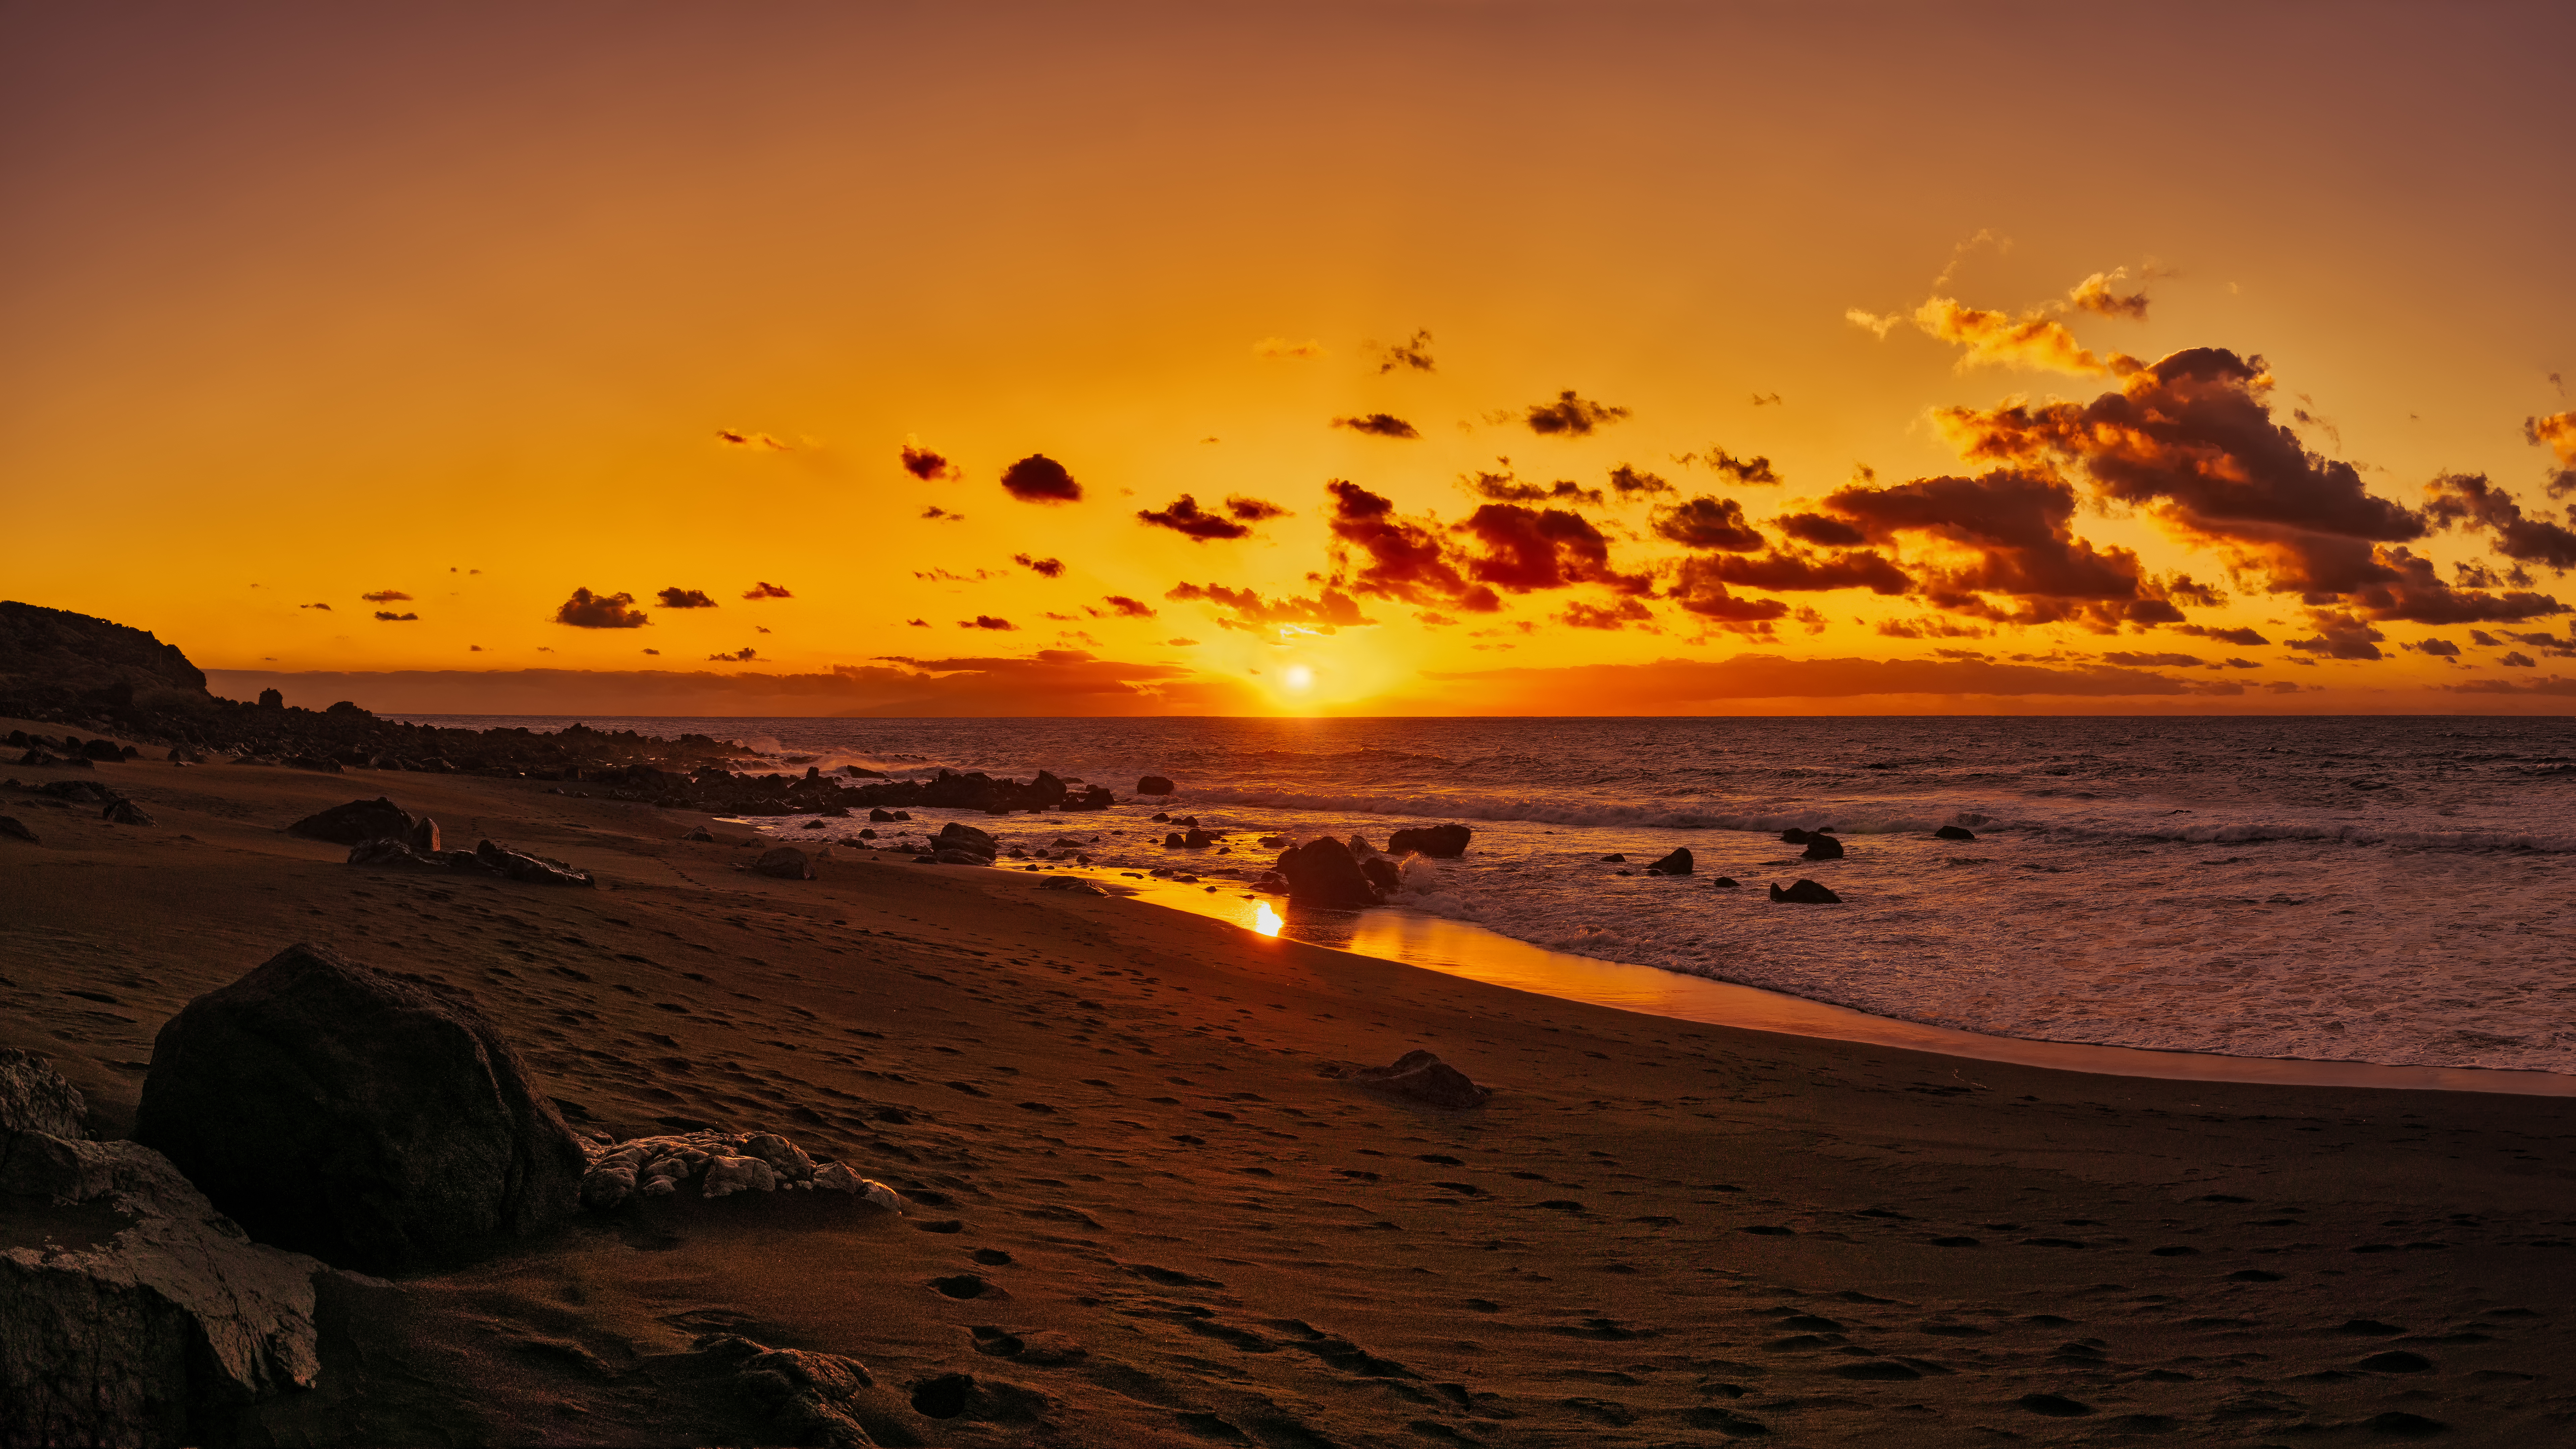 canary islands, nature, sunset, stones, sand, shore, bank, ocean, spain, valle gran rey wallpapers for tablet